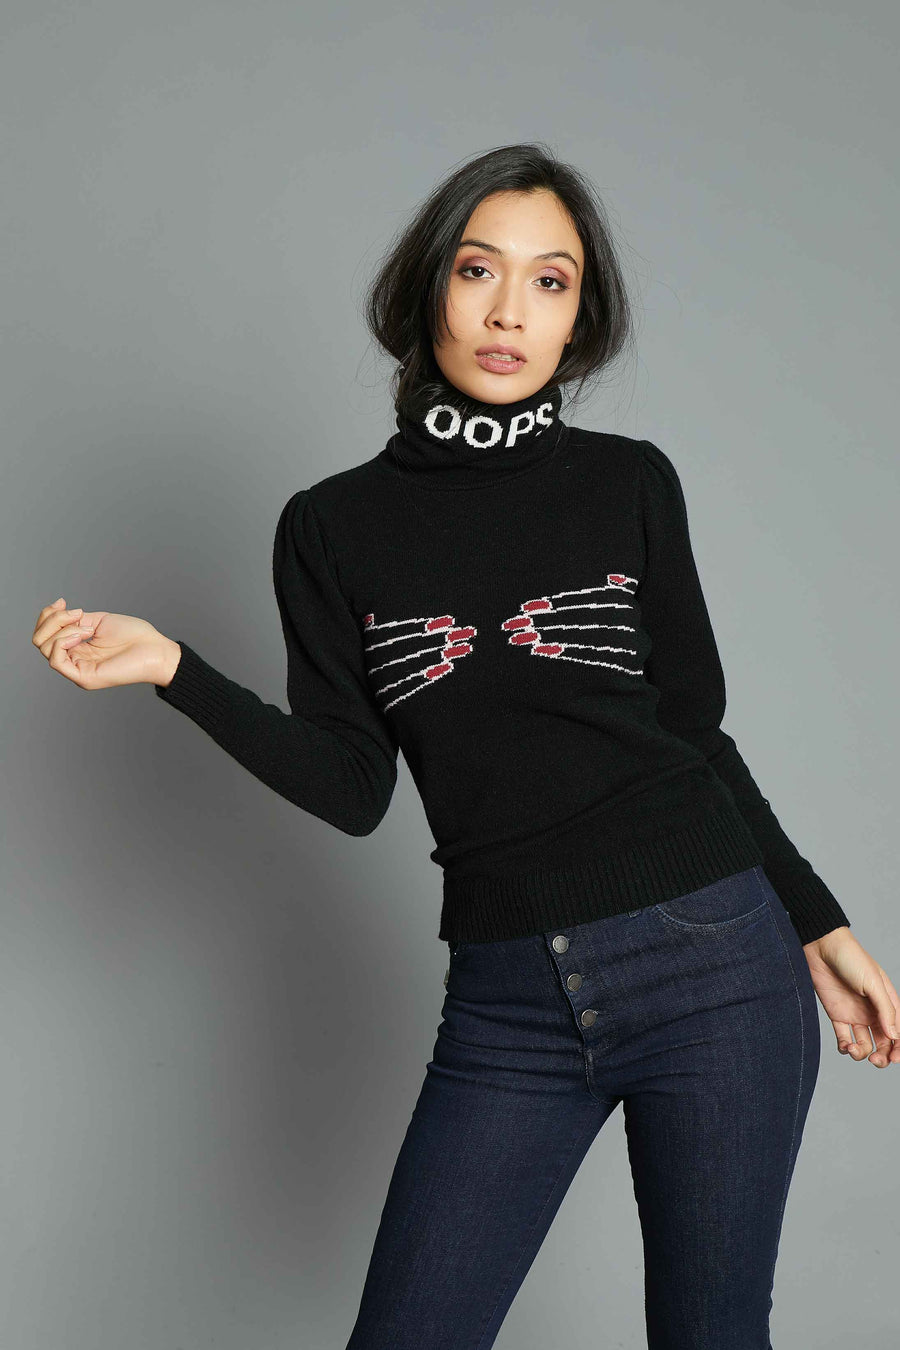 SLIM FIT SWEATER WITH BLACK INTARSIA HANDS